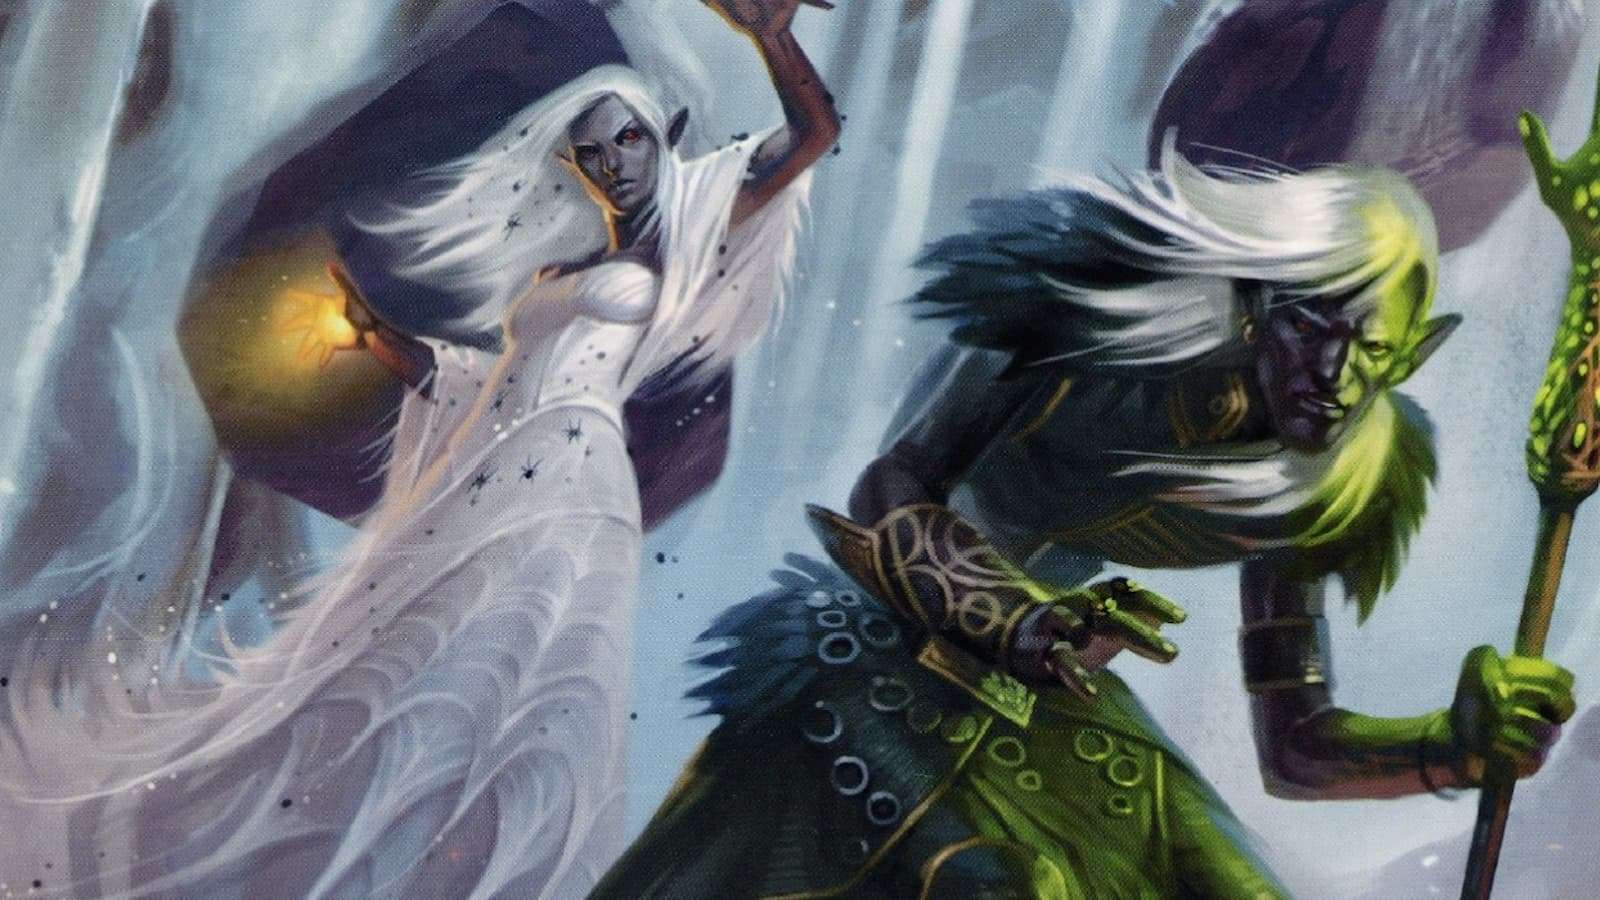 Drow spellcasters from D&D book cover